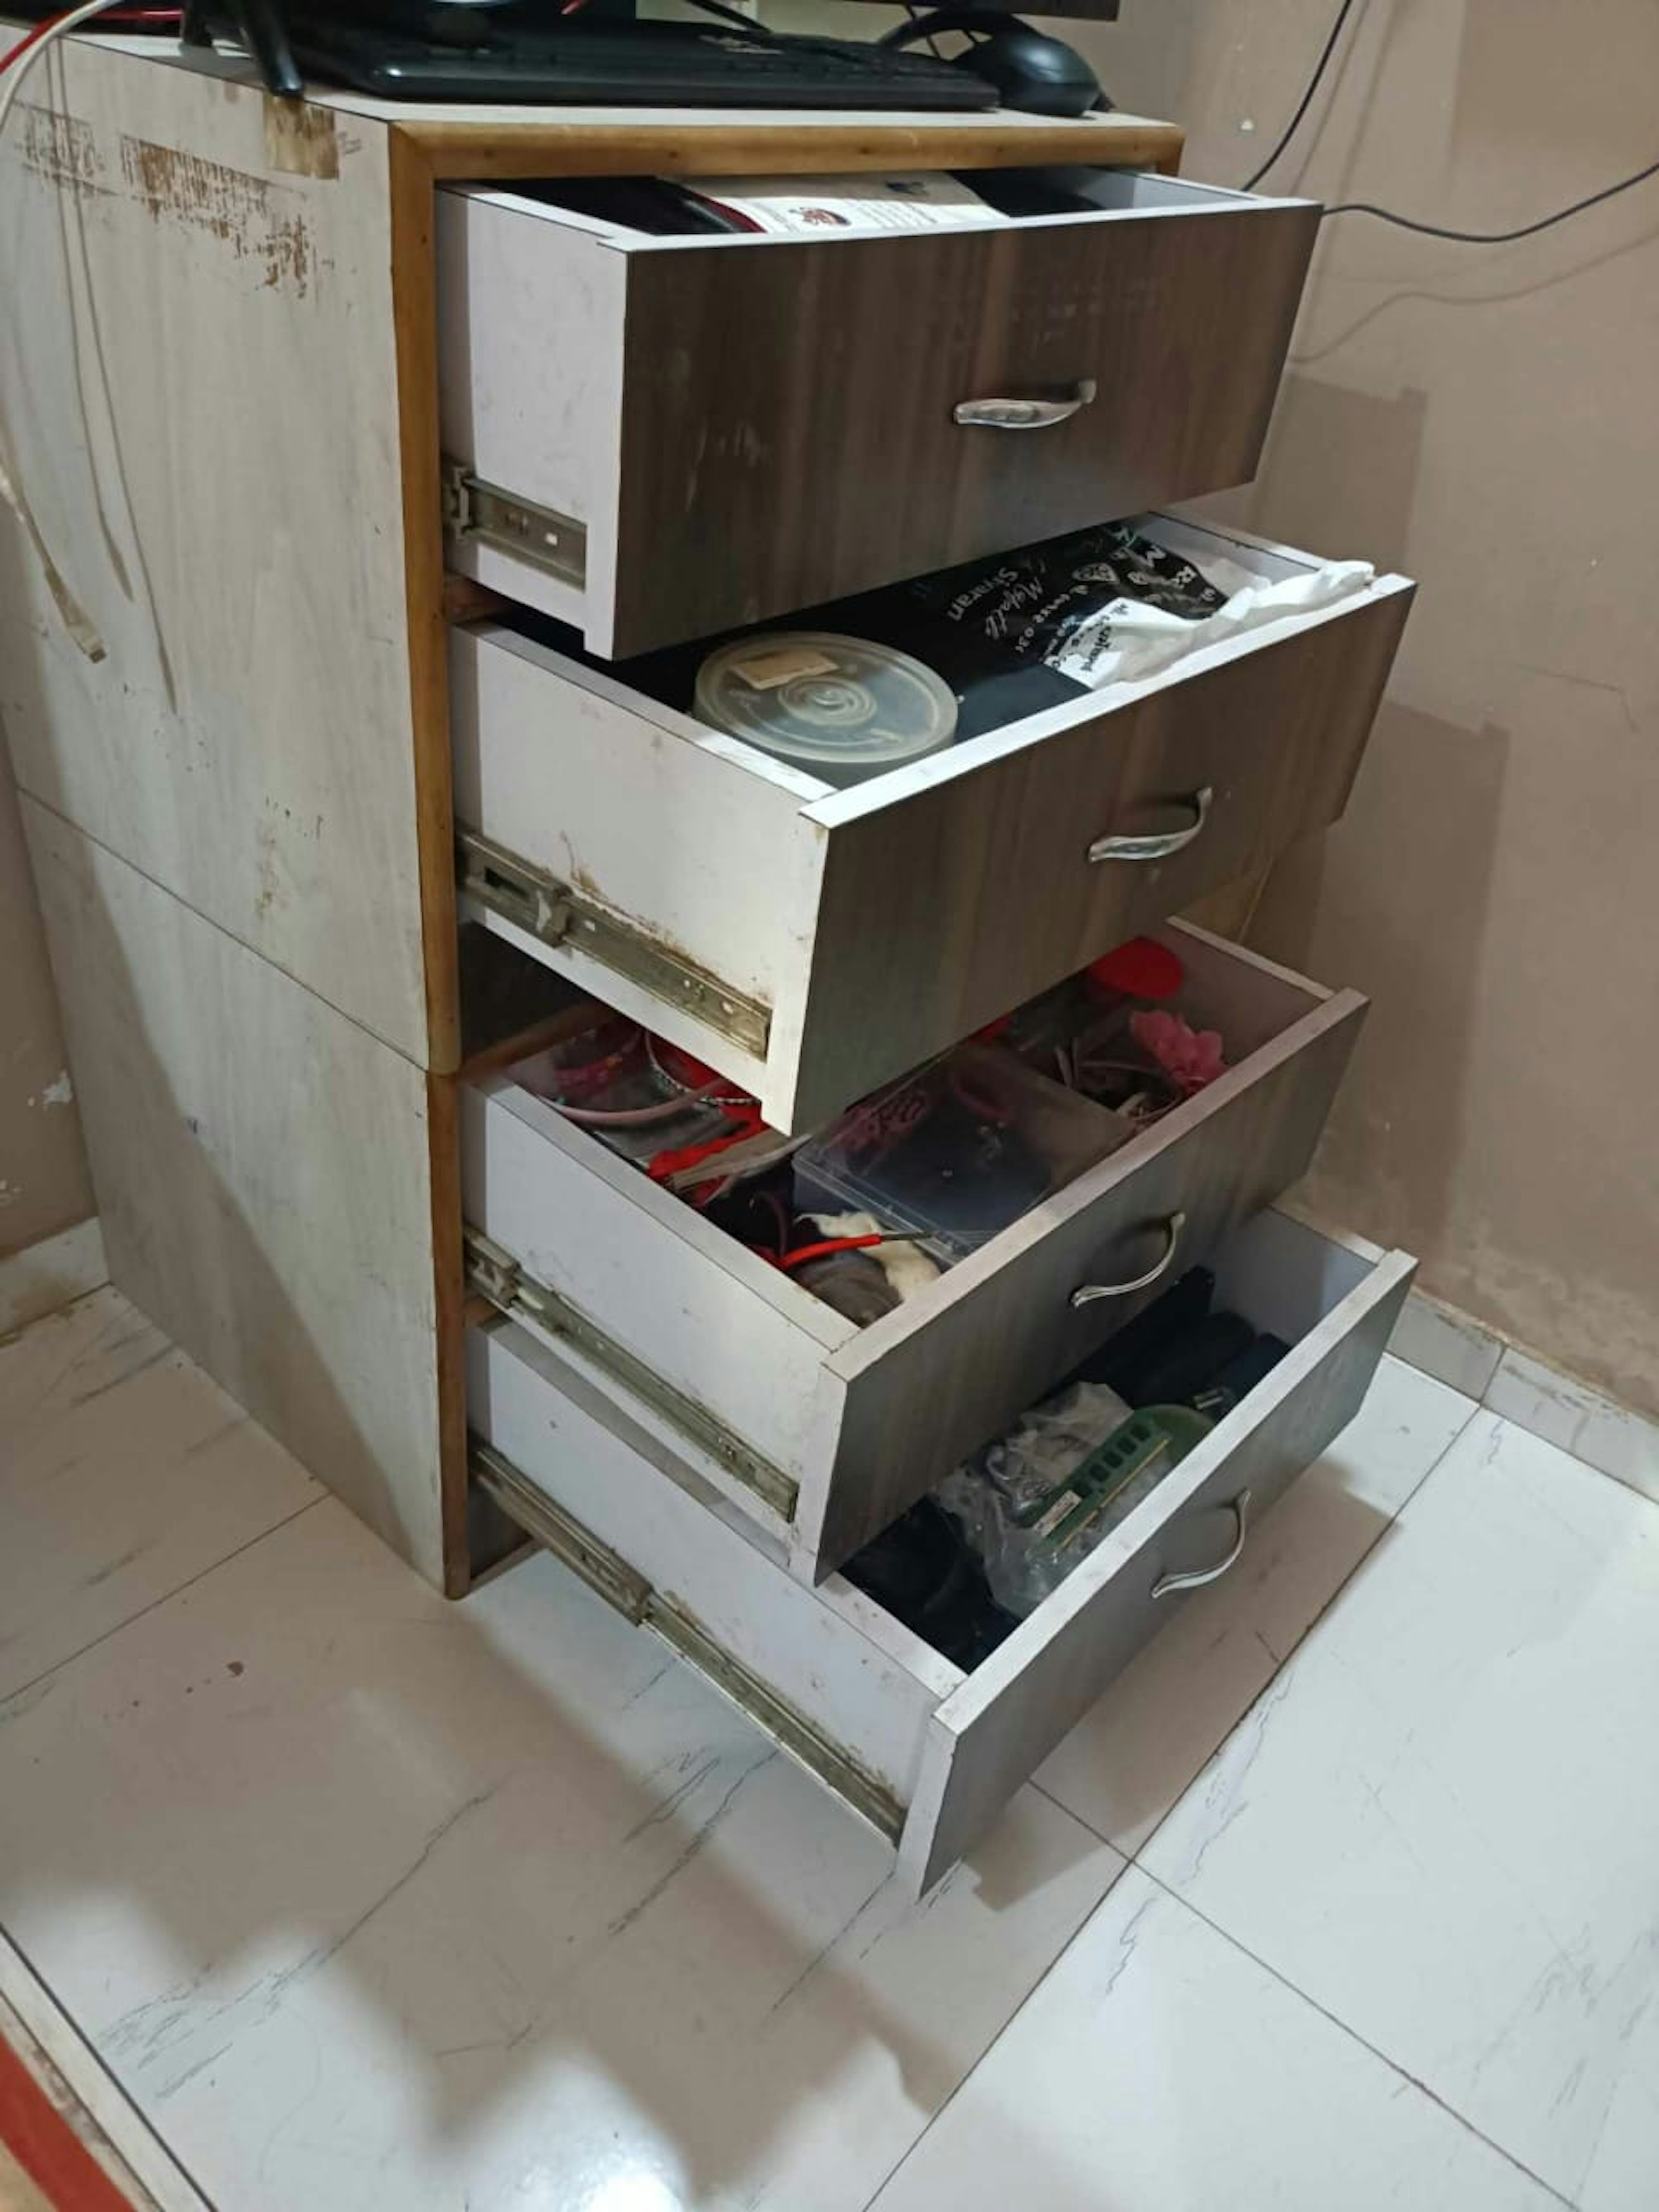 View - Wardrobe photos, Wardrobe available in Ahmedabad, make deal in 24000